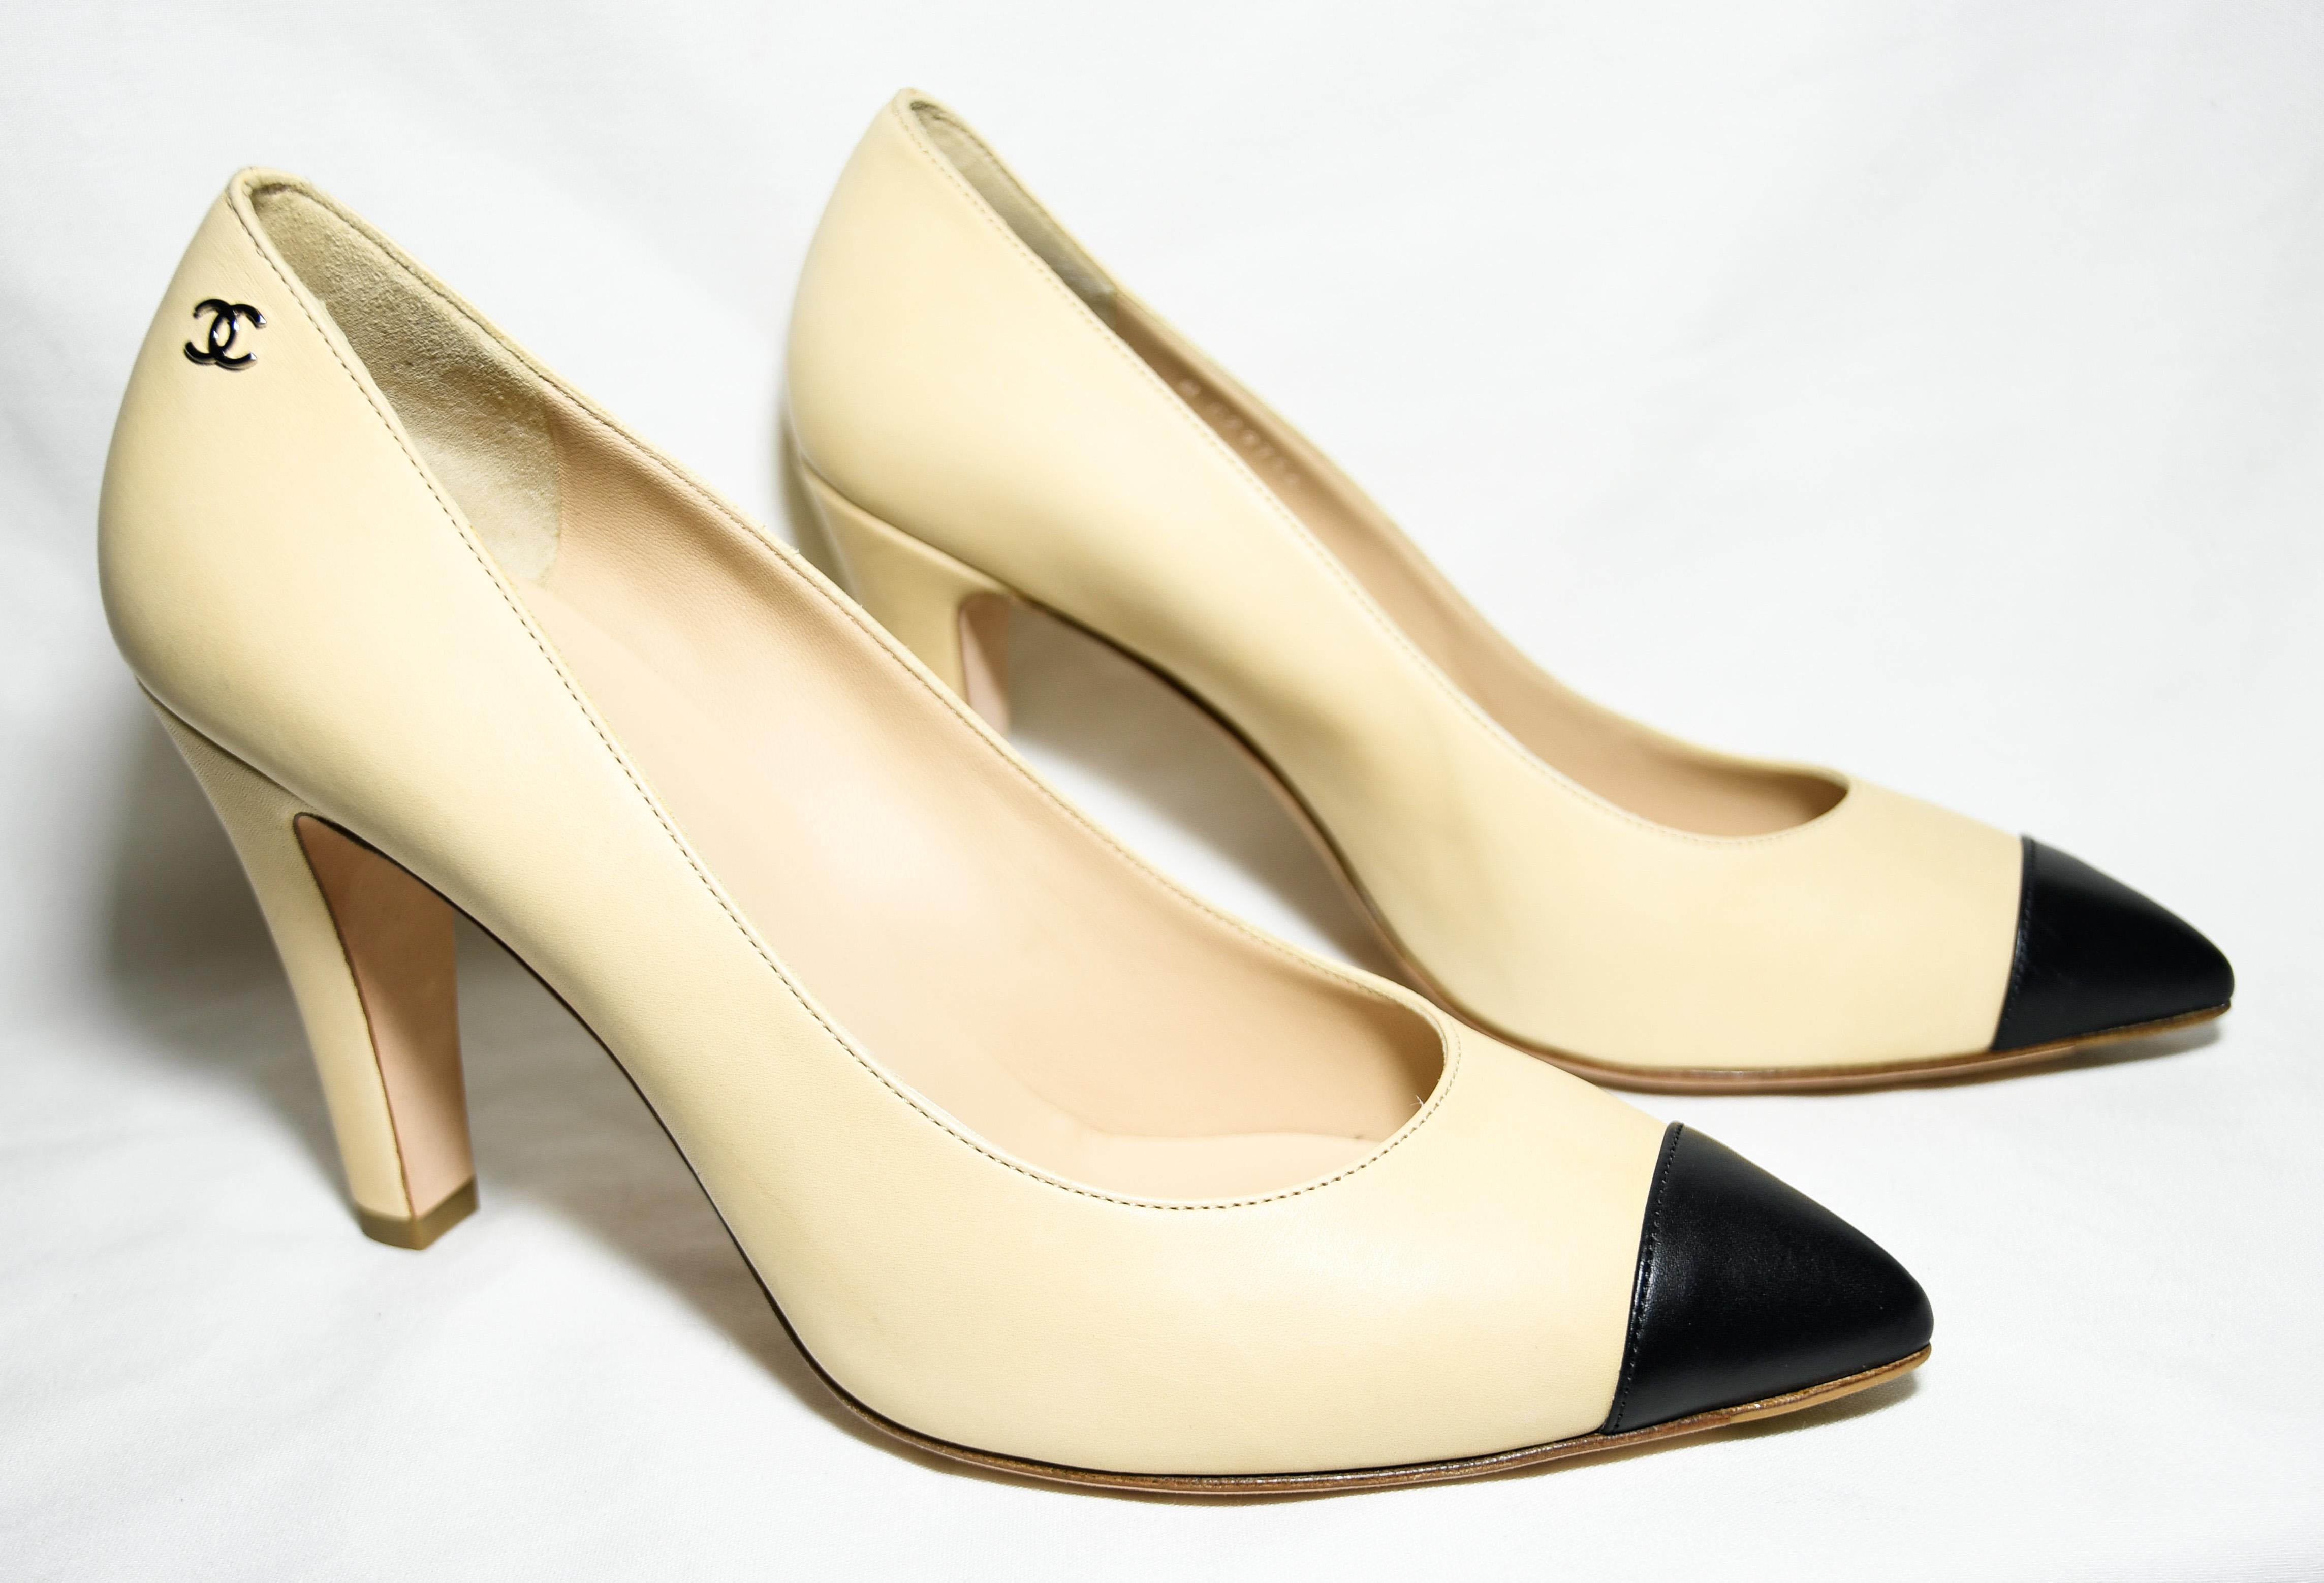 Chanel cap toe in black on beige leather pumps that include gold tone metal CC on the top side of heel.   Beige and black matte leather Chanel pumps with covered heels and are lined in beige leather.  These shoes are in excellent condition.  Heel 4